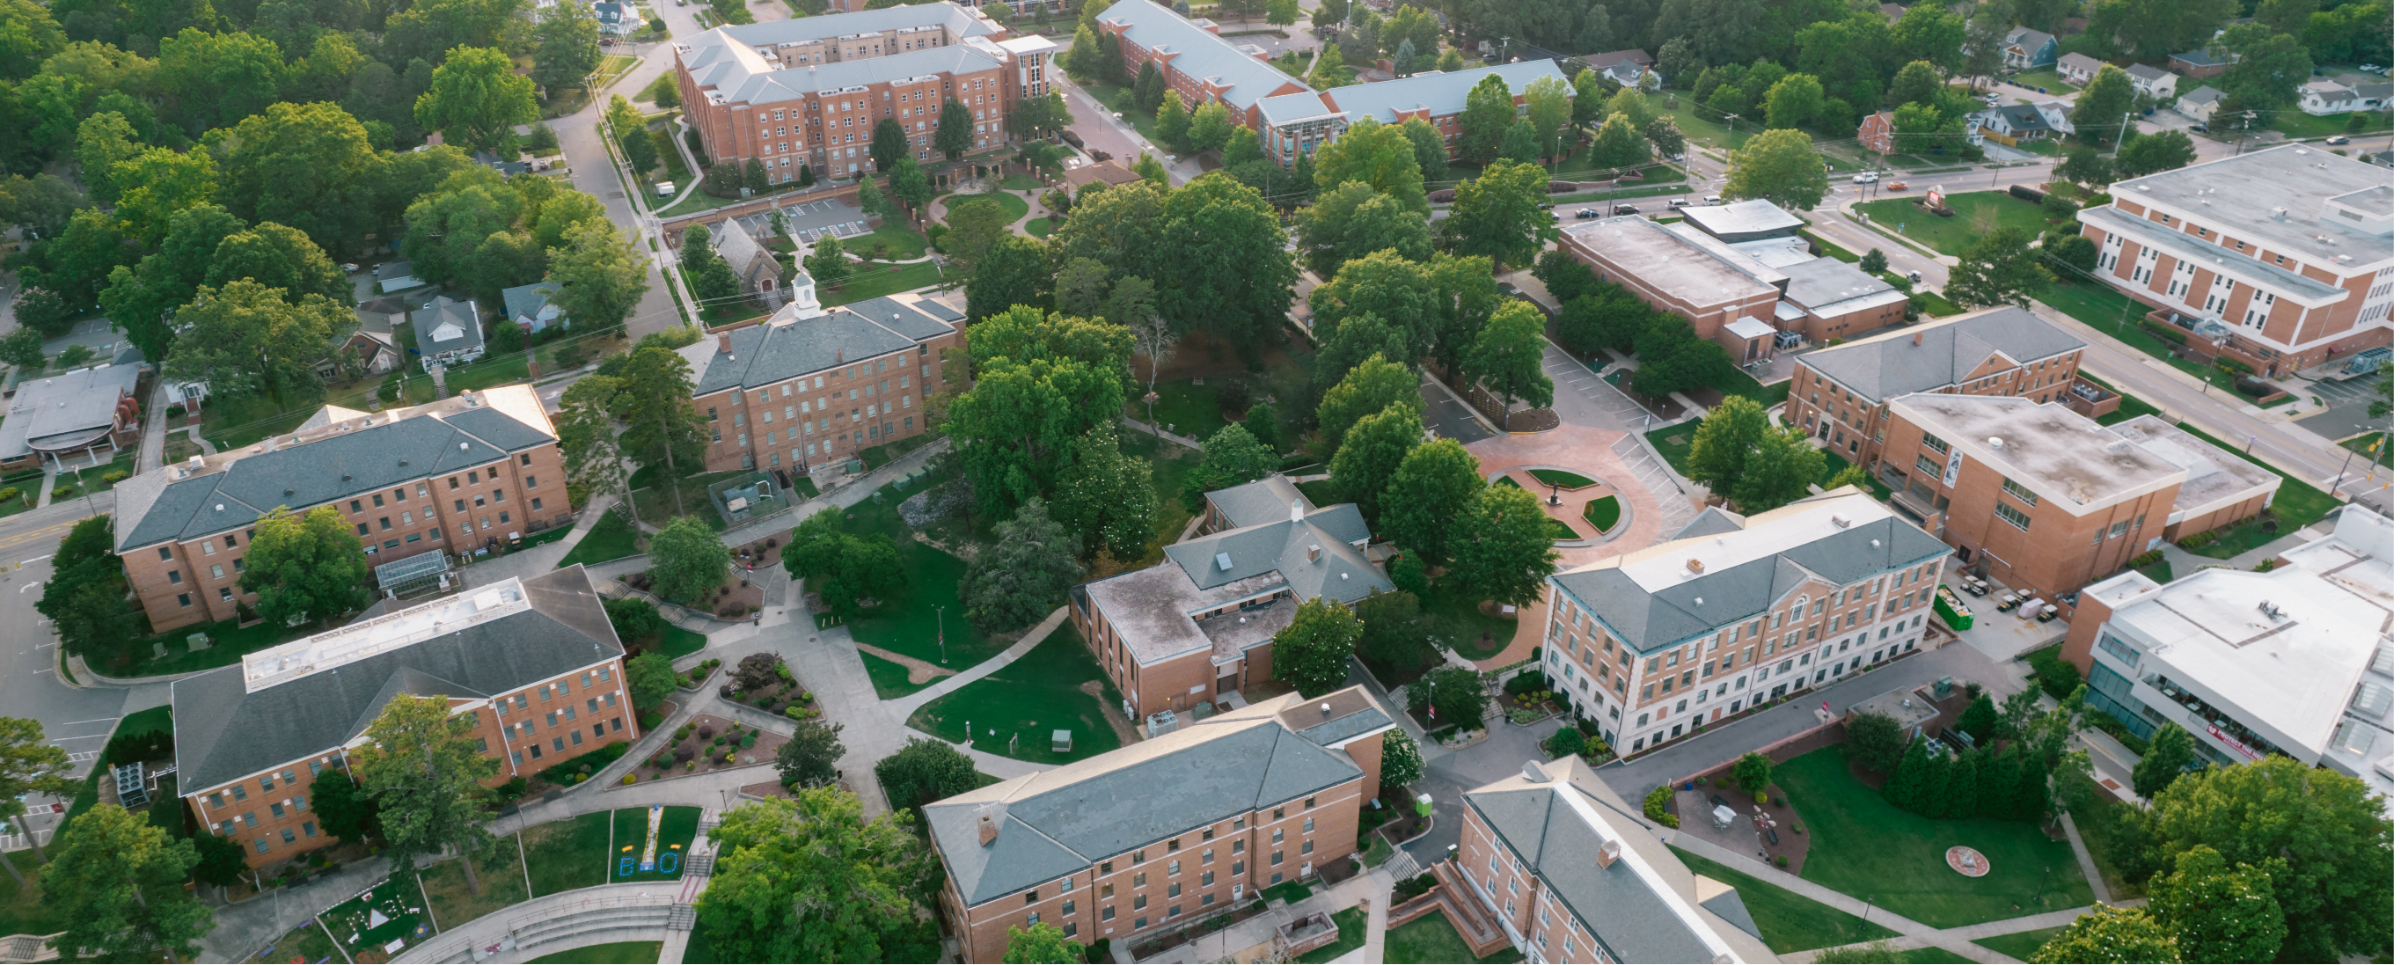 A University campus as seen from above